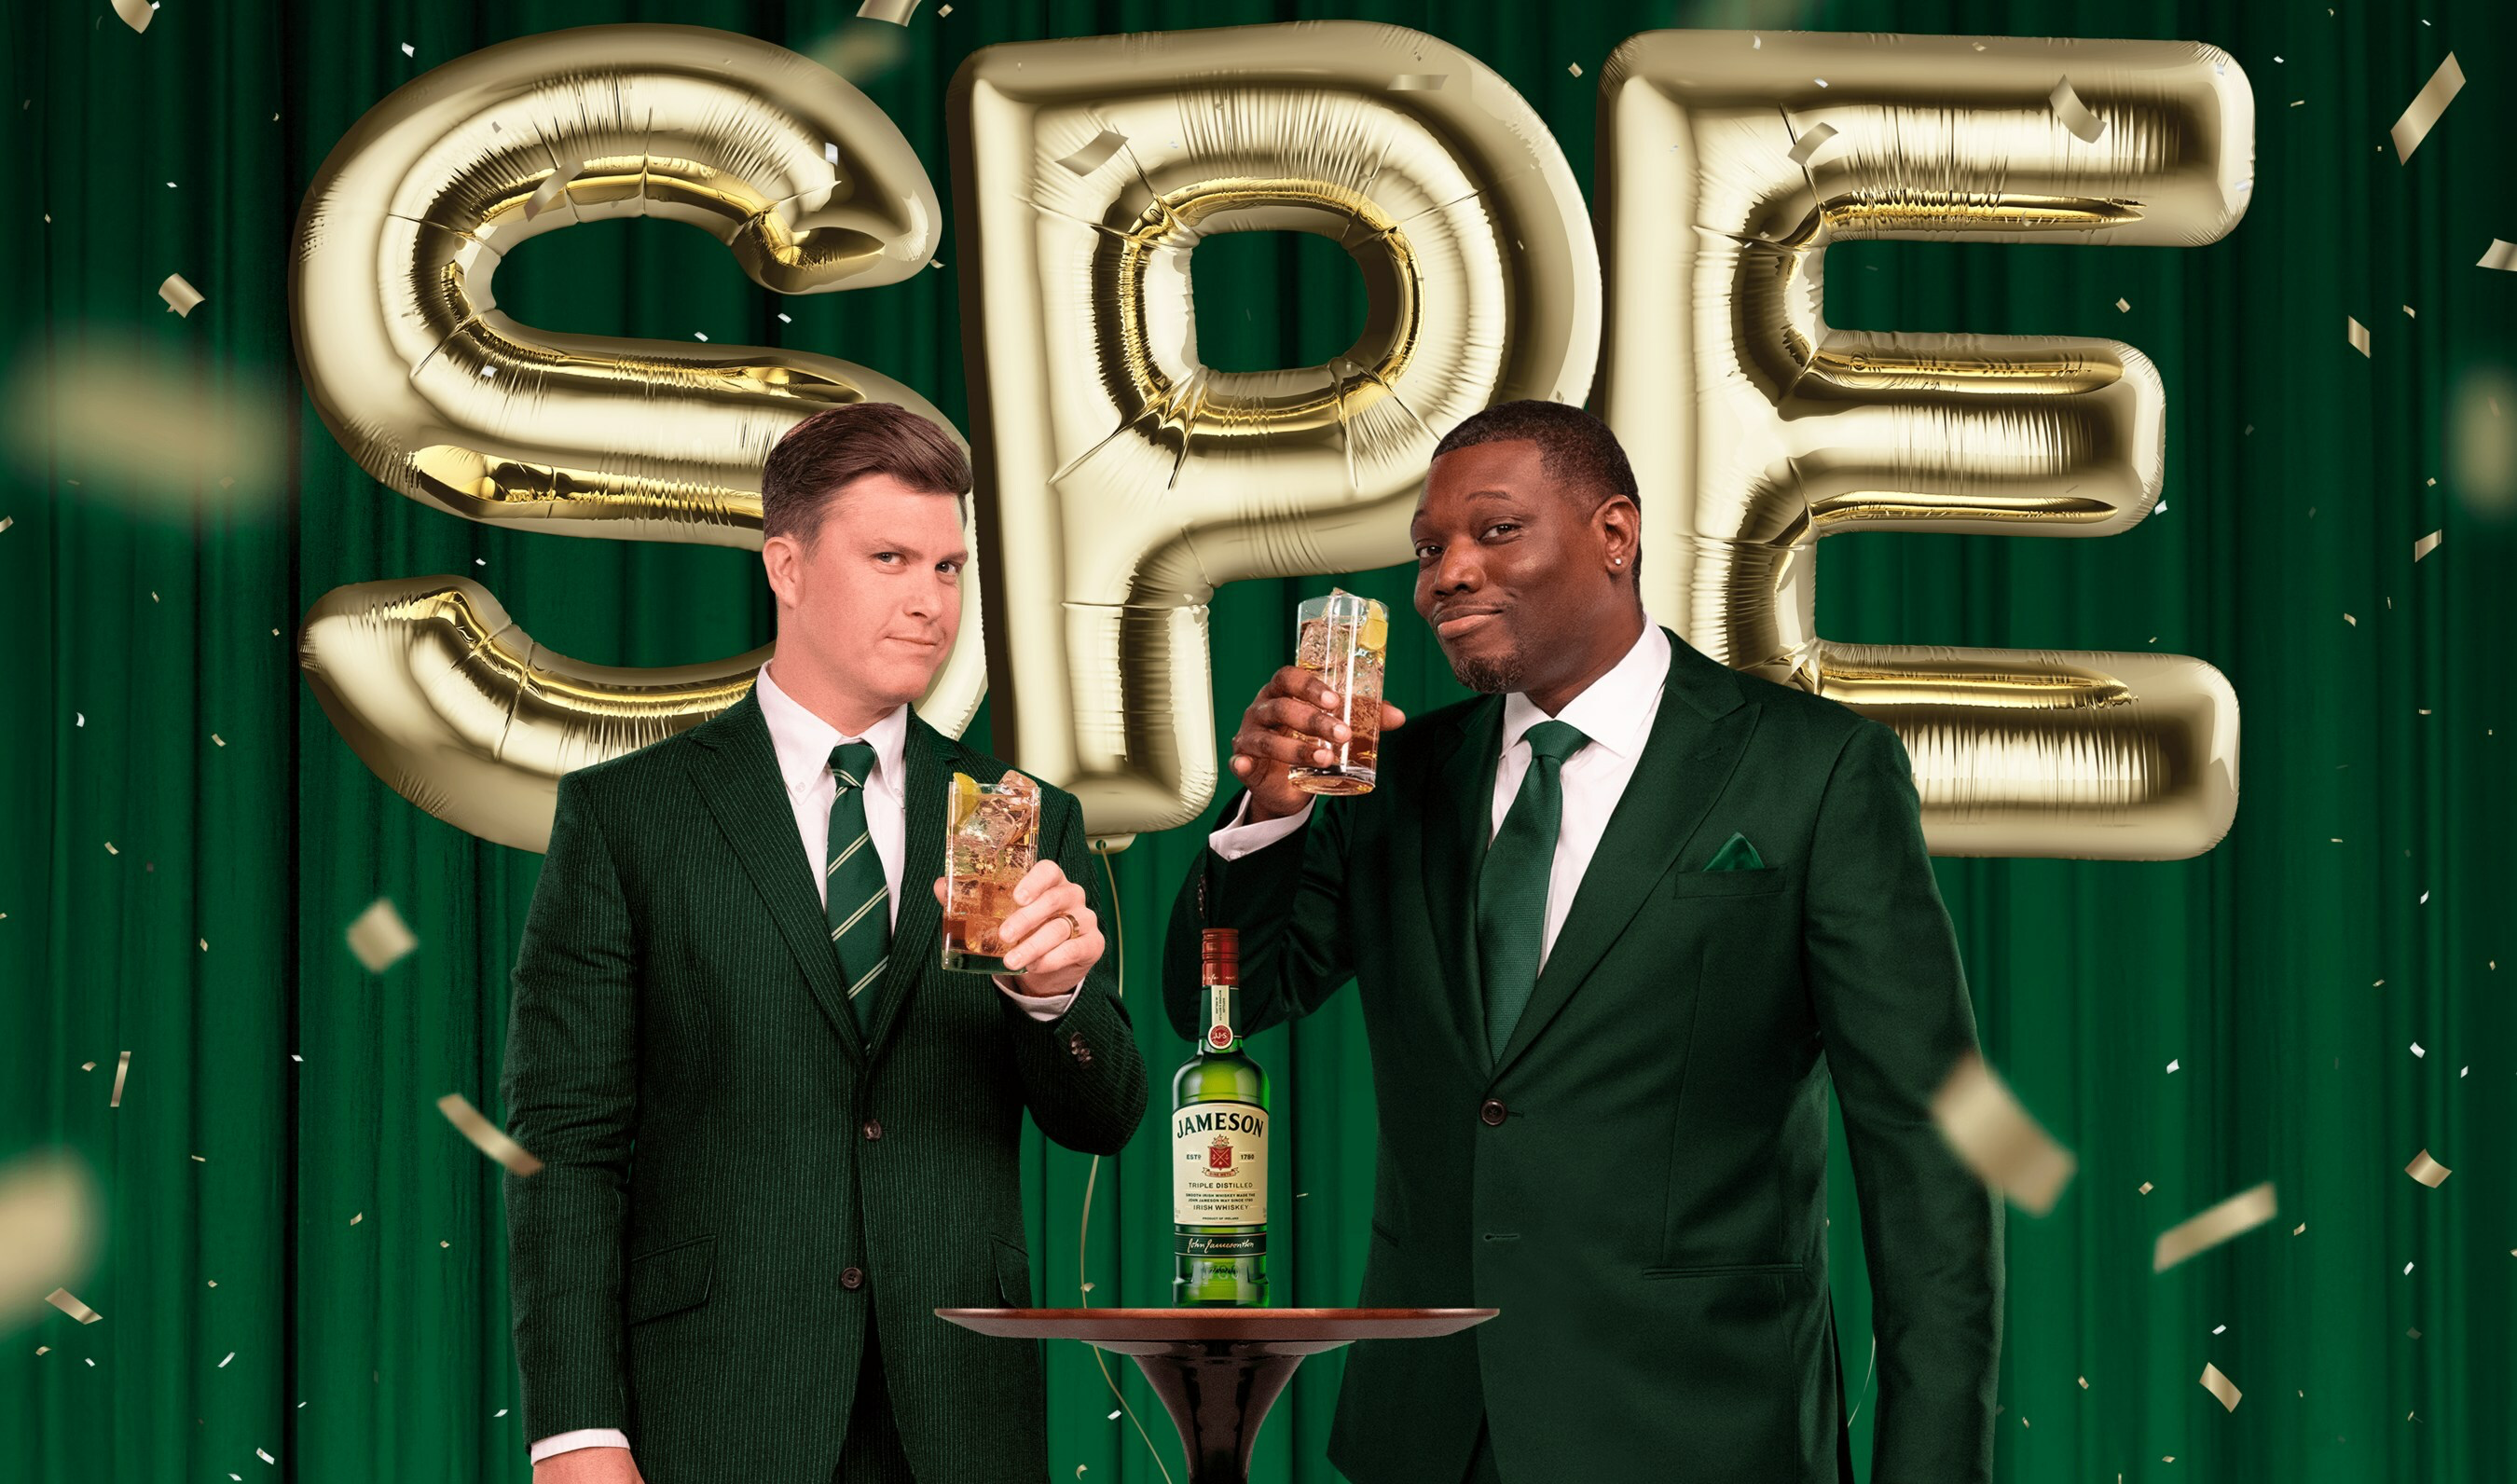 Jameson & SNL Comedians Create New “St. Patrick’s Eve” Holiday